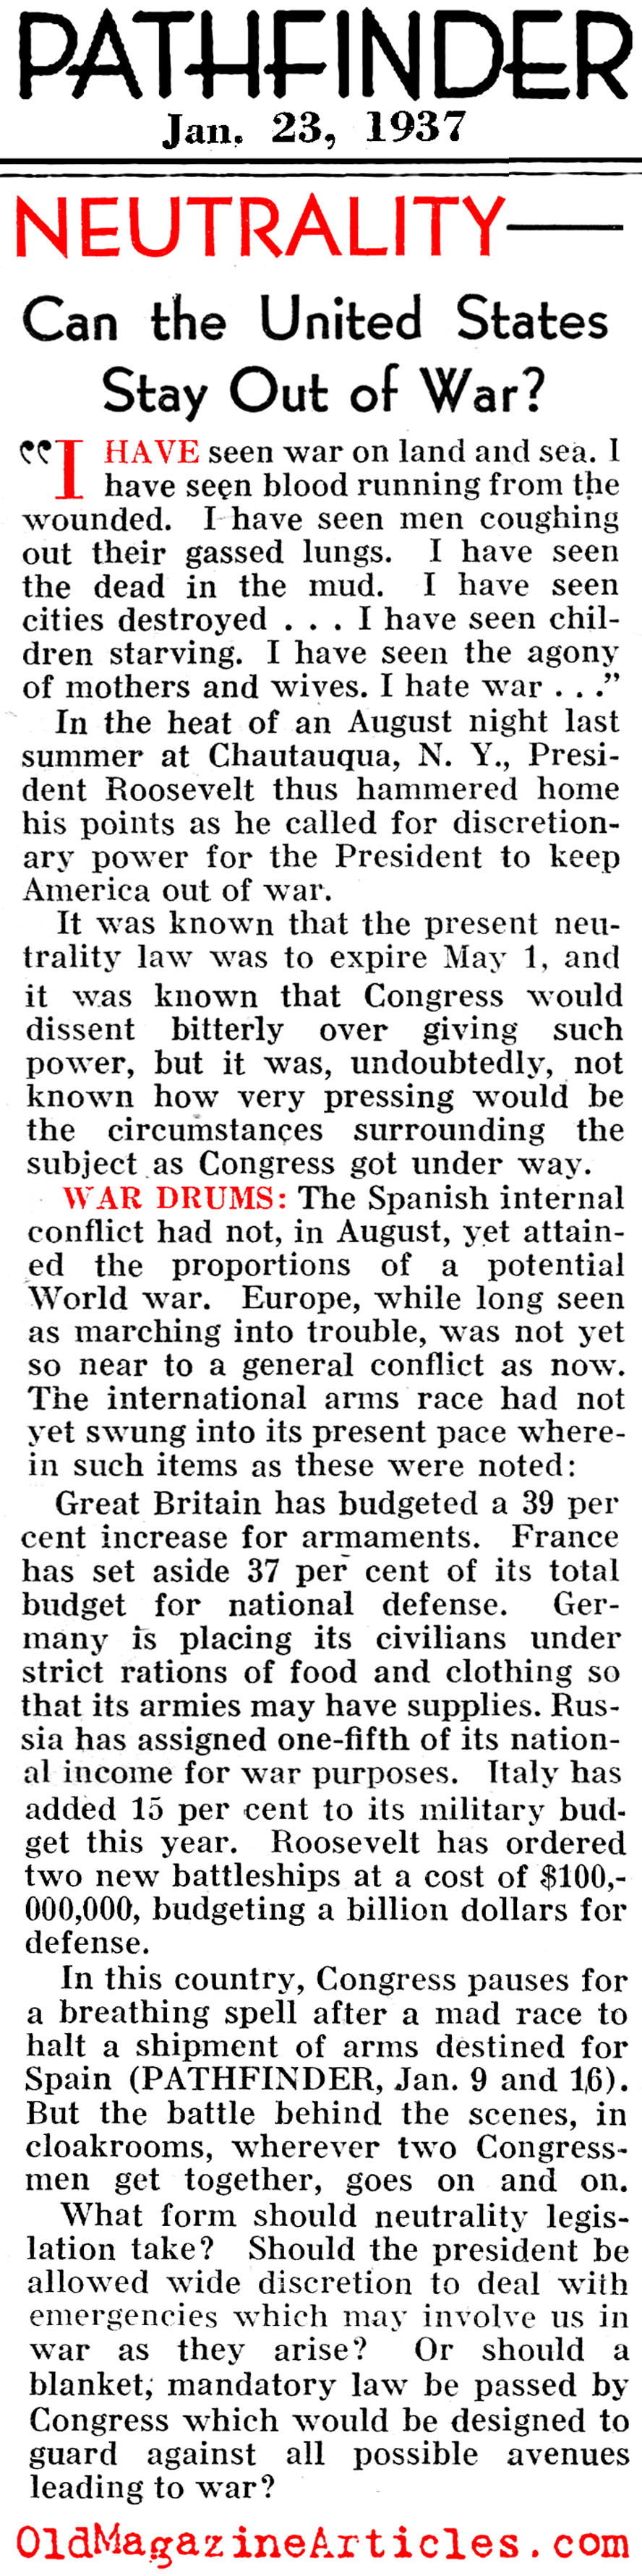 Can The U.S. Stay Out of The War? (Pathfinder Magazine, 1937)